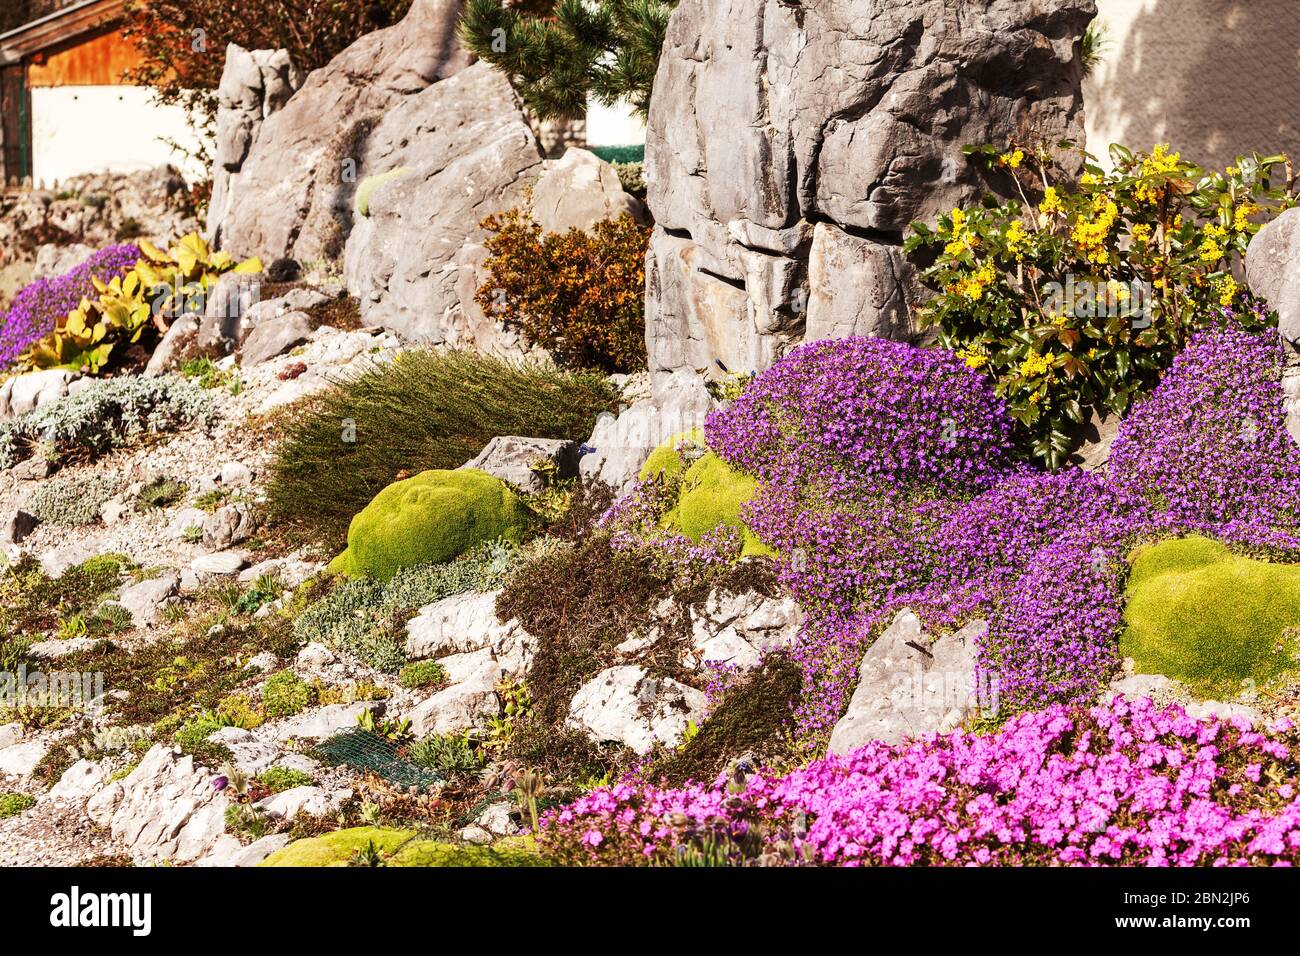 Artificially created rock garden with alpine moss, star moss, blue cushion, cushion plant and edelweiss. Stock Photo